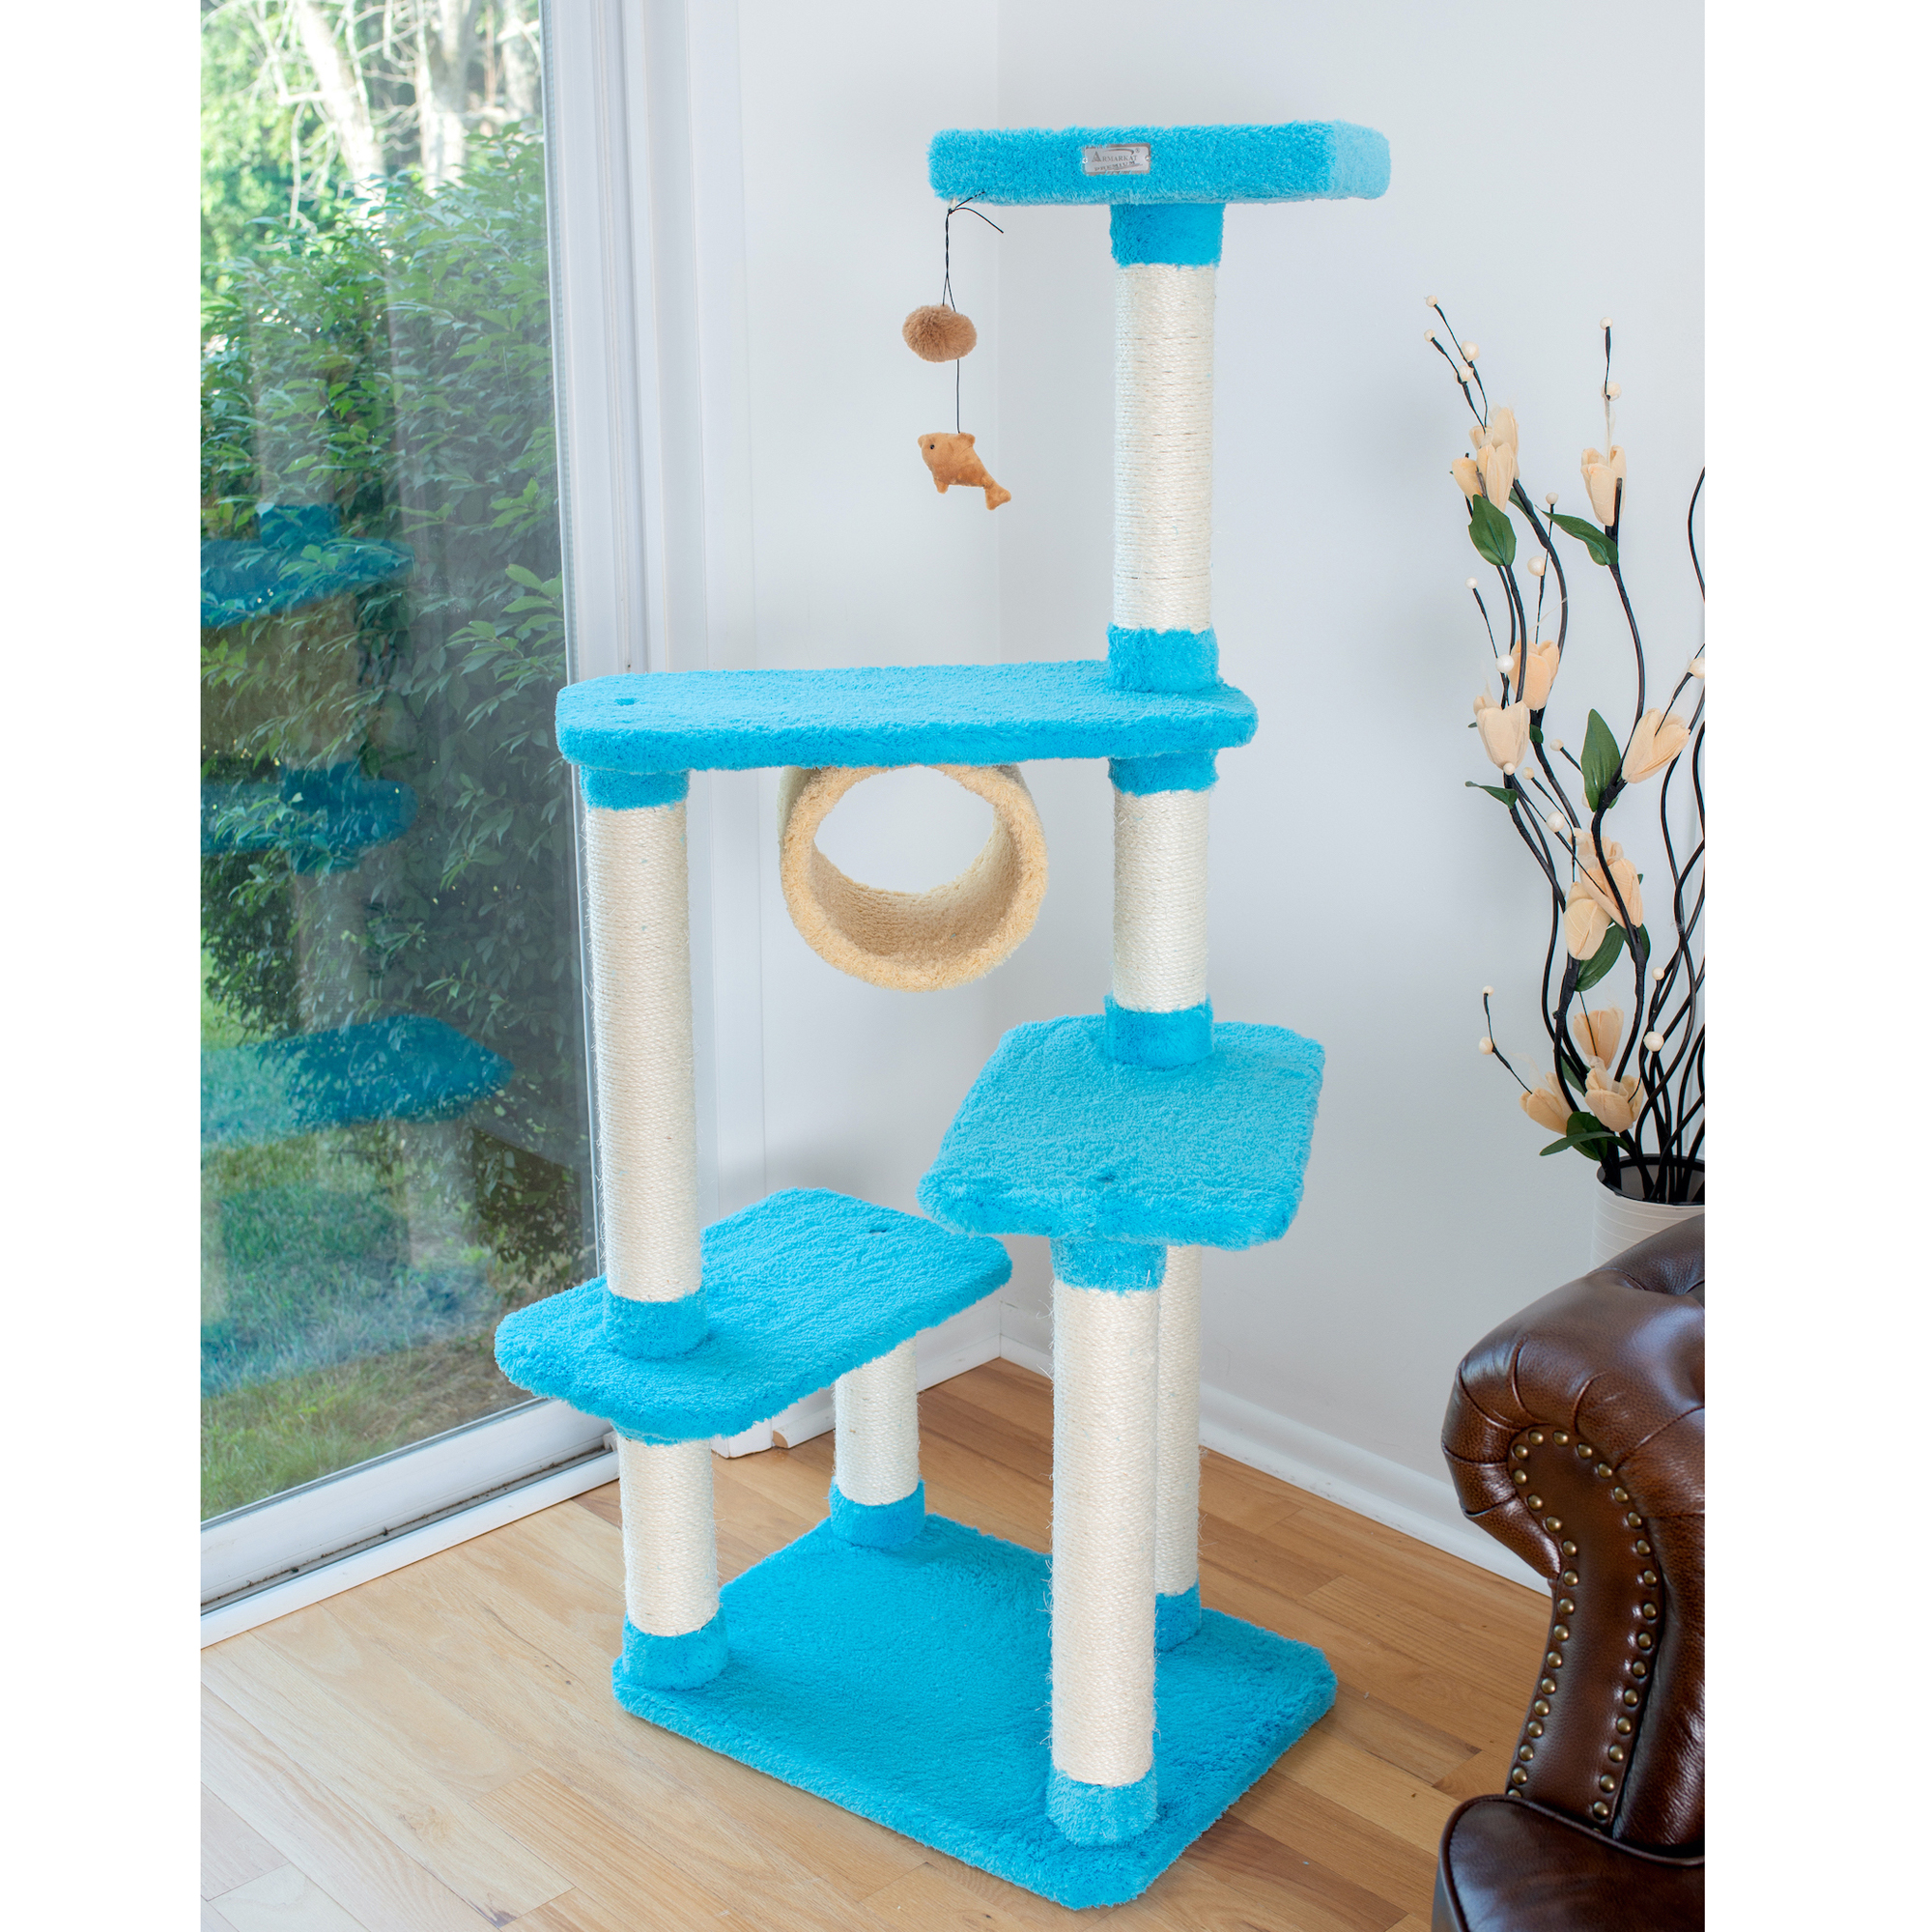 Picture of Armarkat Real Wood Cat Climber  Cat Junggle Tree With Platforms  X6105 Skyblue